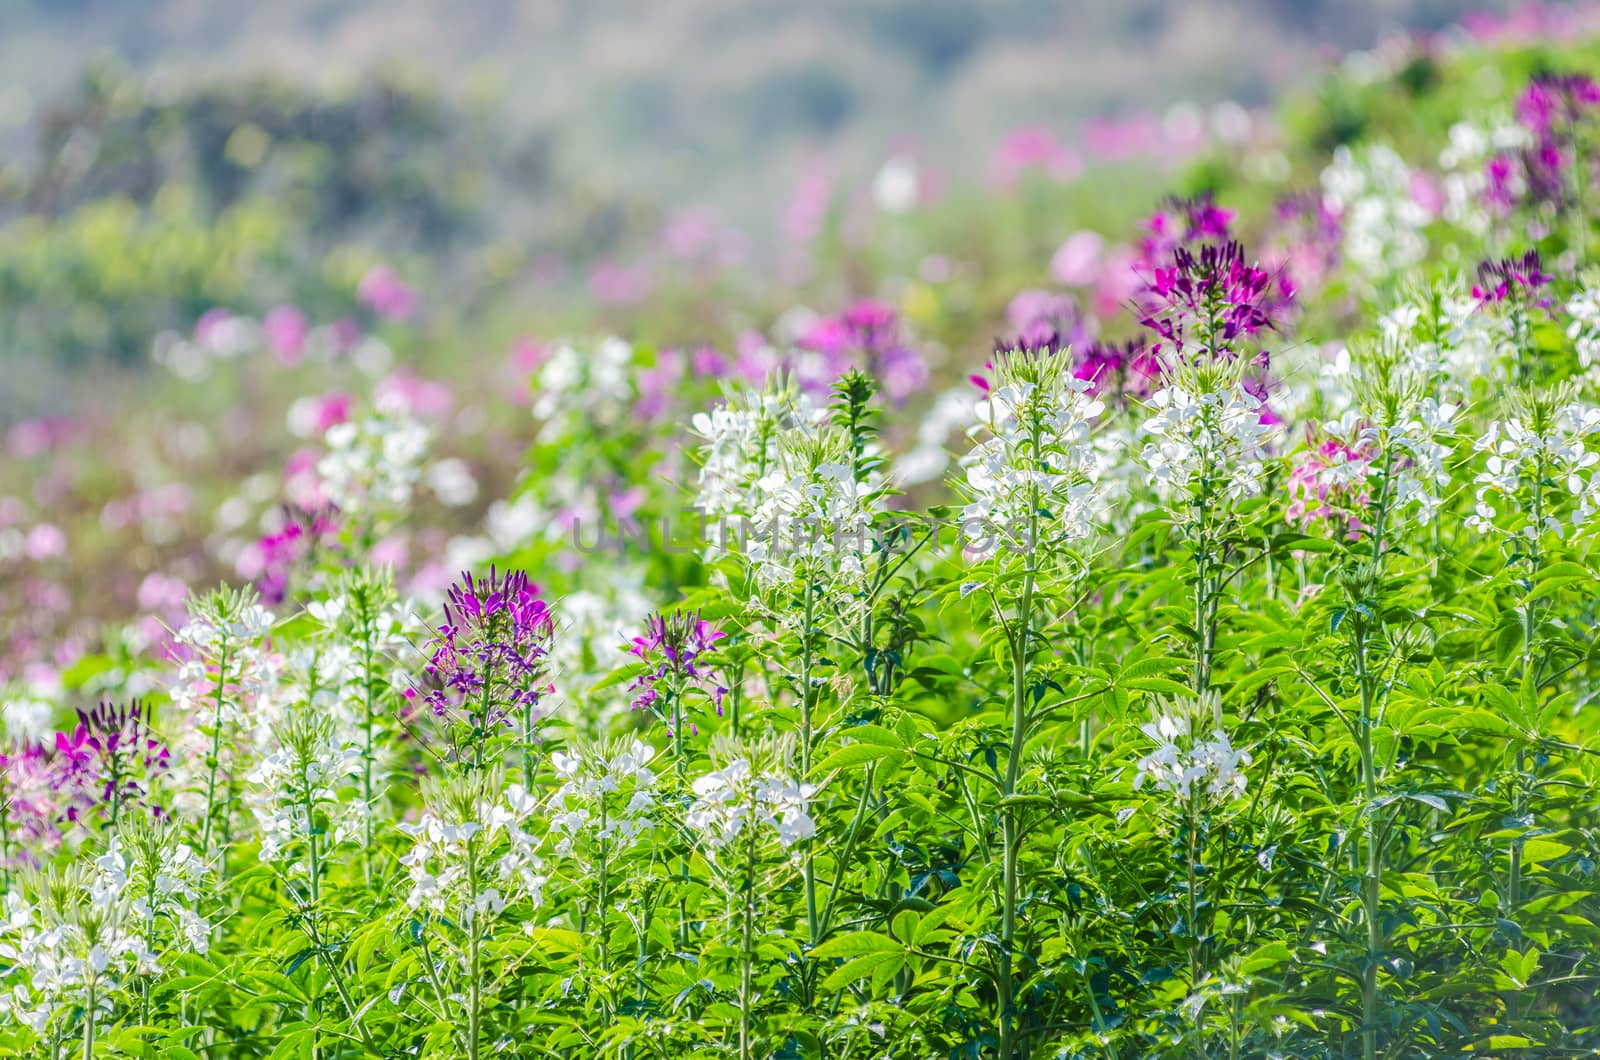 Purple and white flowers in the field with blurred backgroud by wanichs